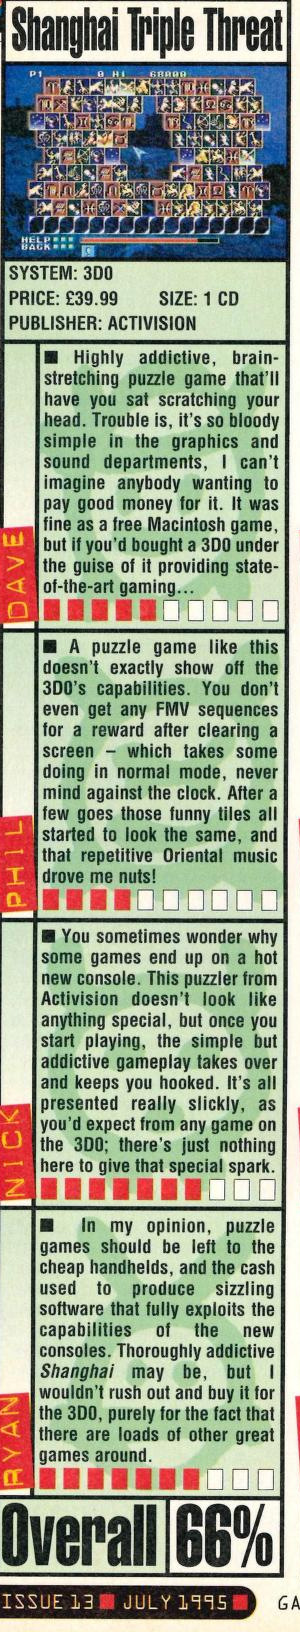 Thumbnail for File:Shanghai Triple Threat Review Games World UK Issue 13.png